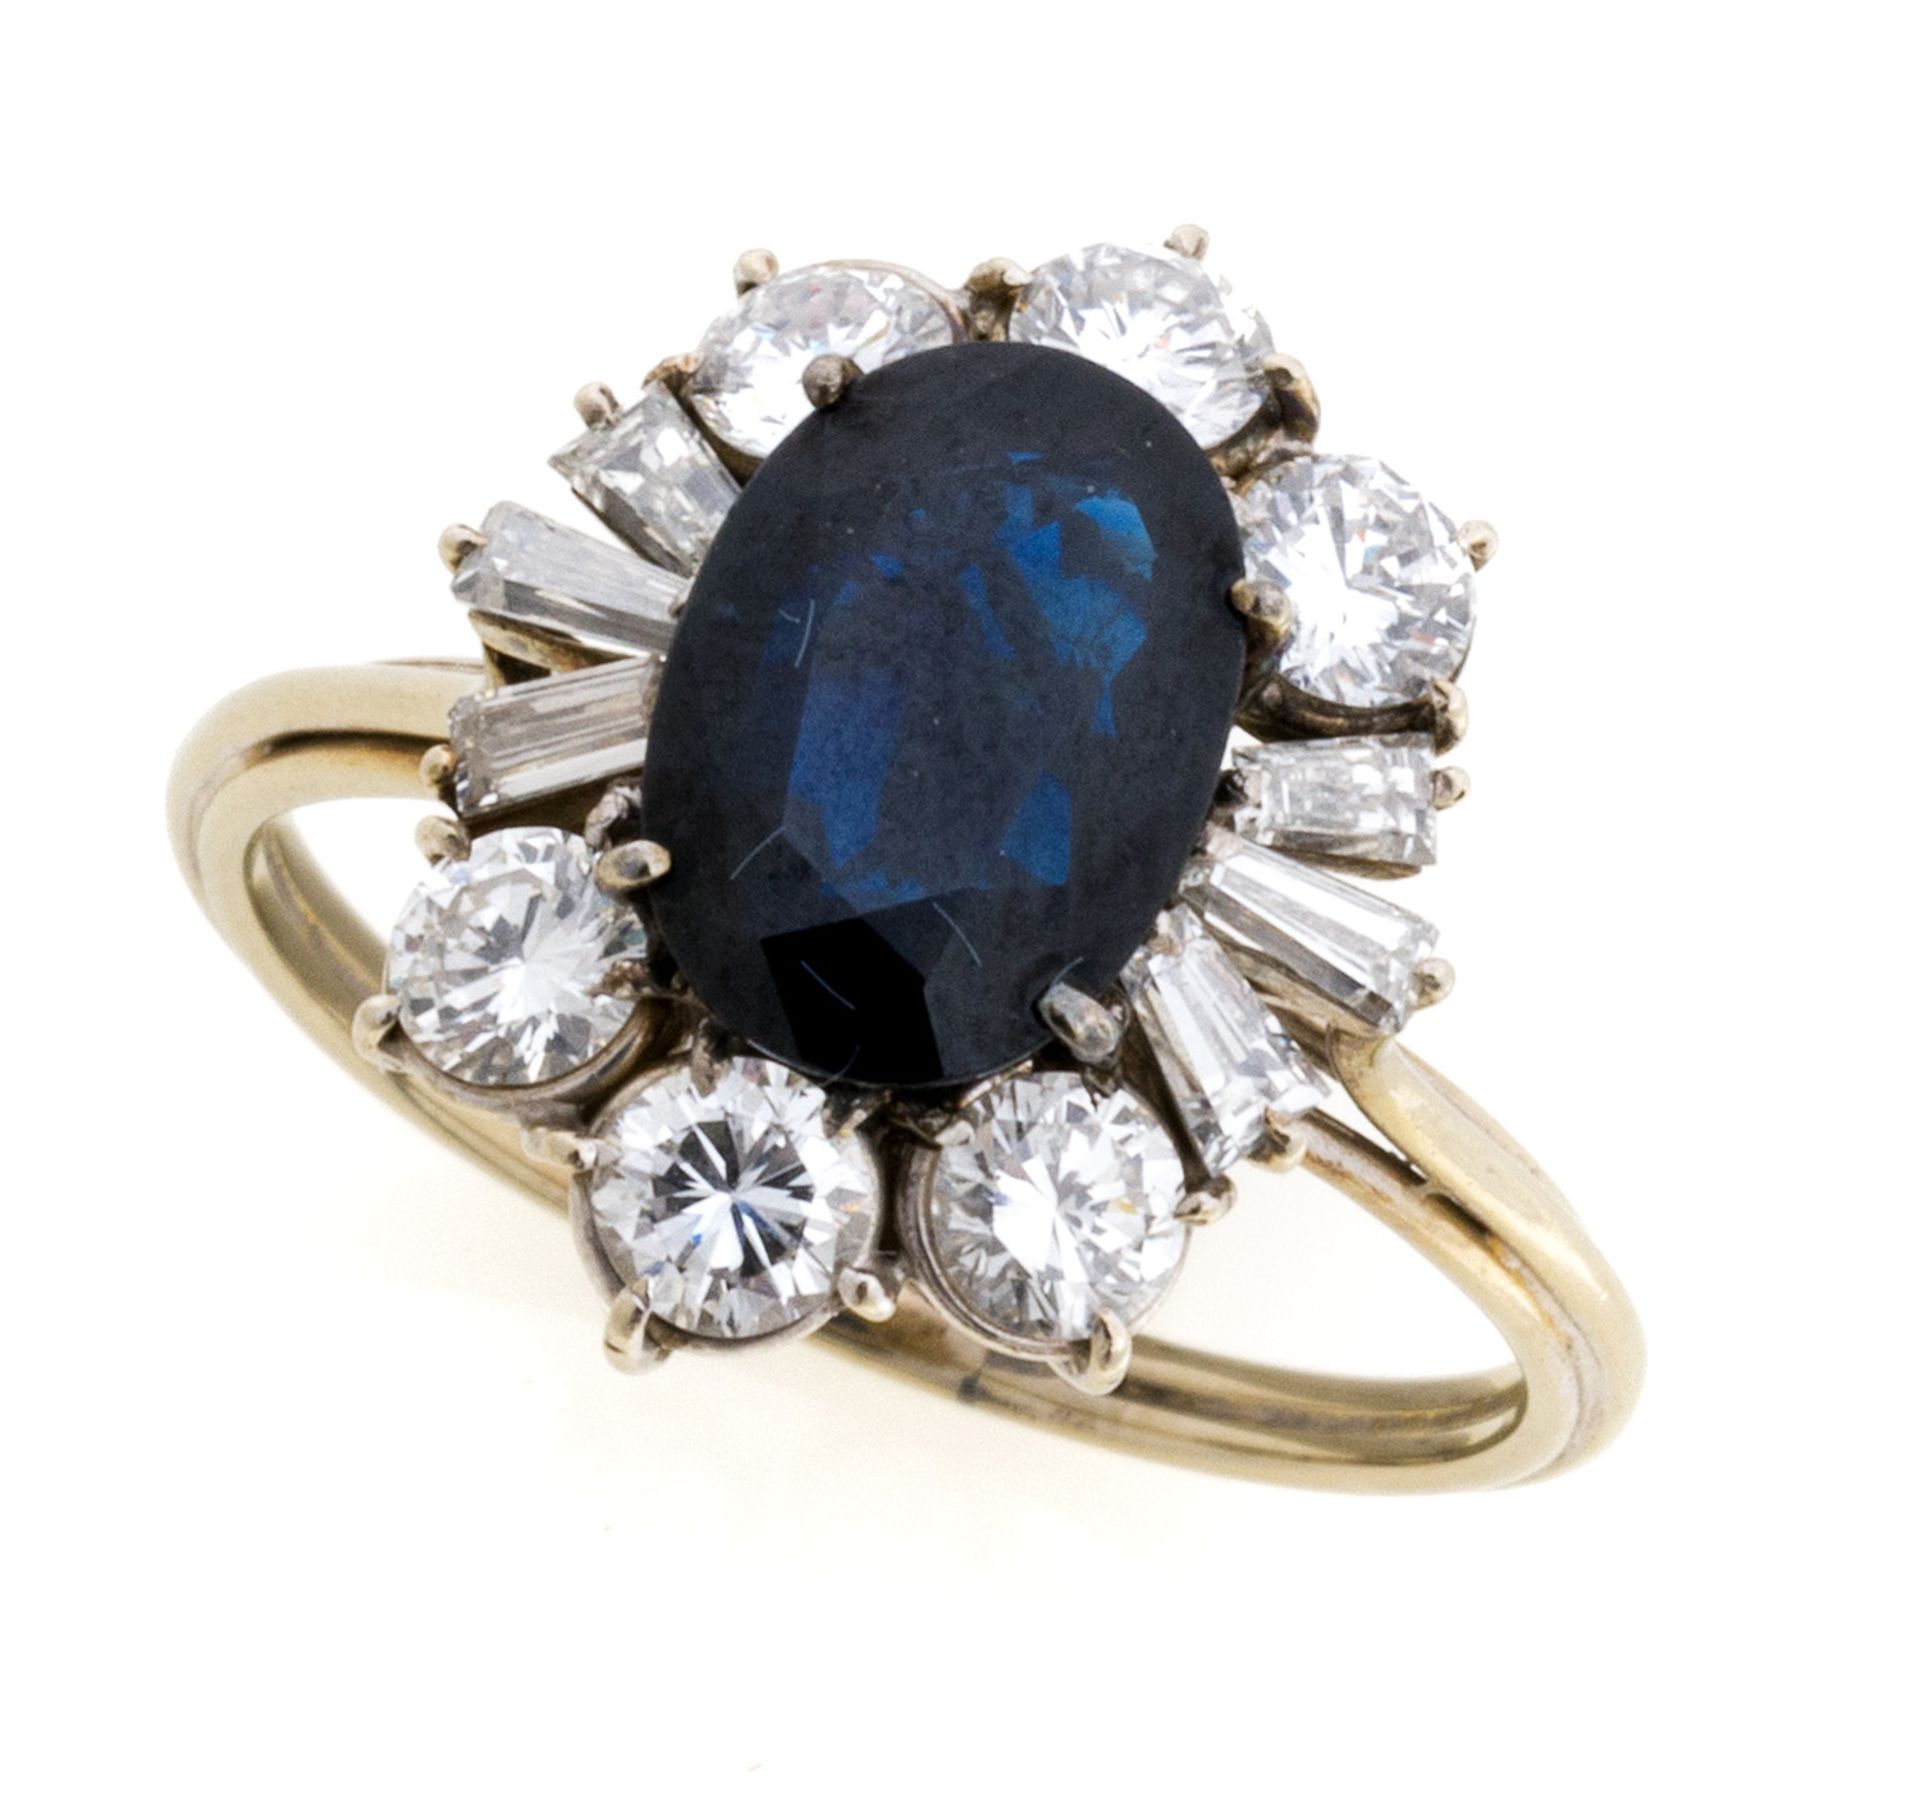 WHITE GOLD RING WITH SAPPHIRE AND DIAMONDS